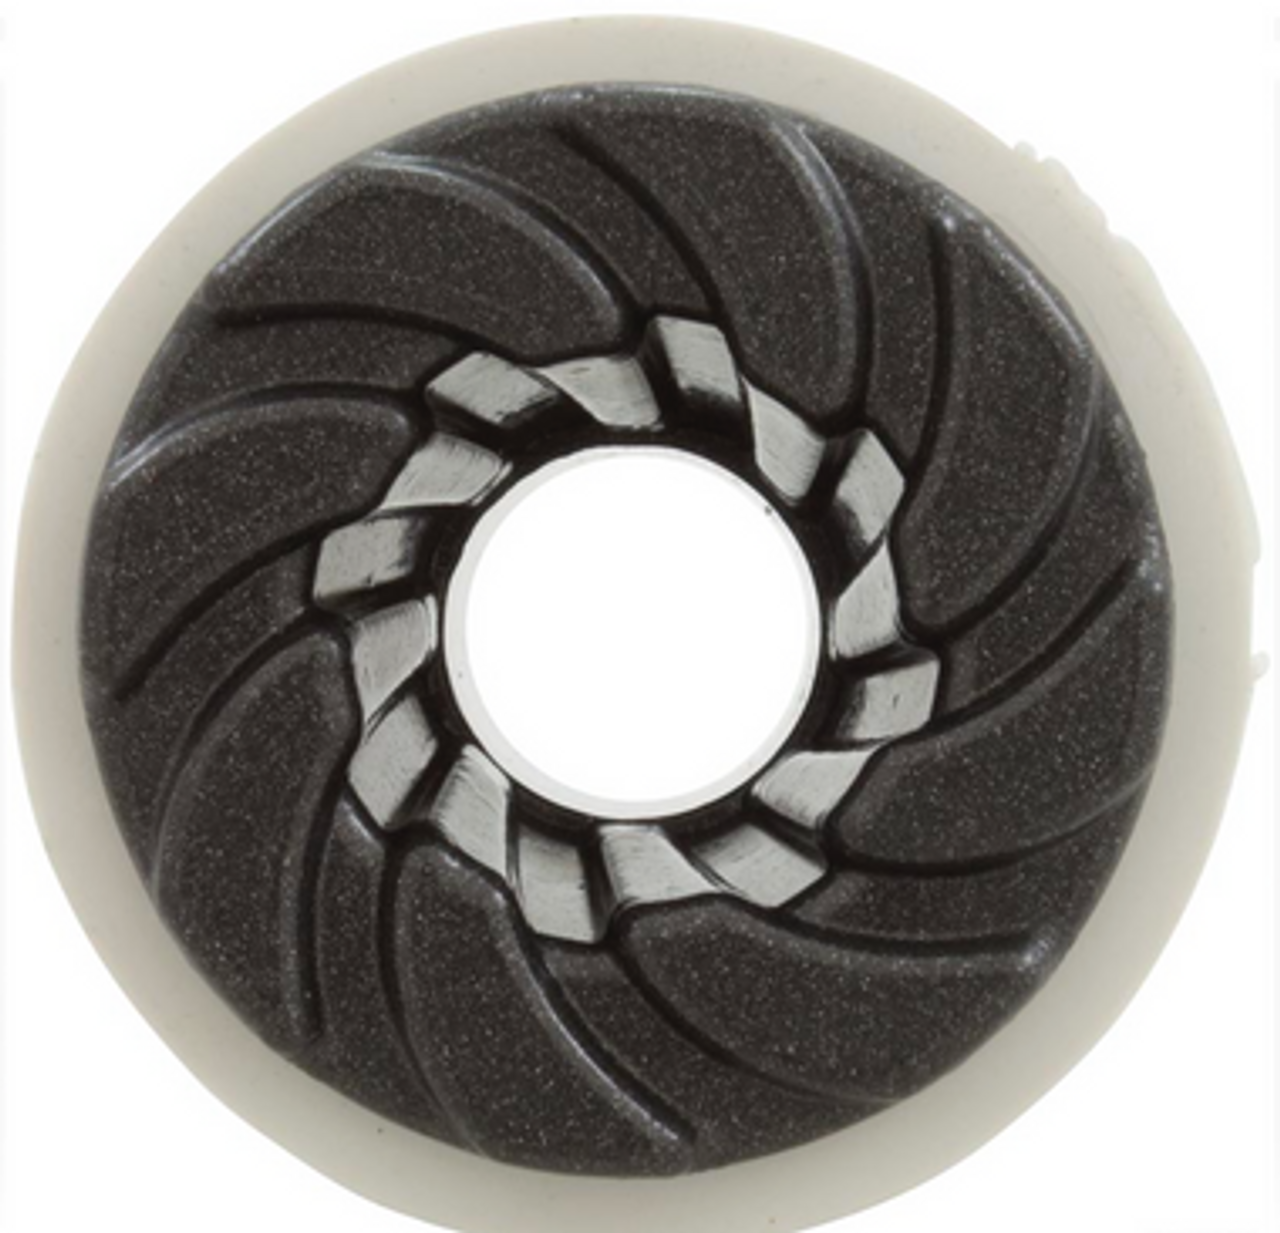 1 5/8" Face, Jet Assembly, Waterway, Ozone, Swirl Face, 1 1/8 to 1 1/4" Hole Size, 3/4" Barb, Dark Gray